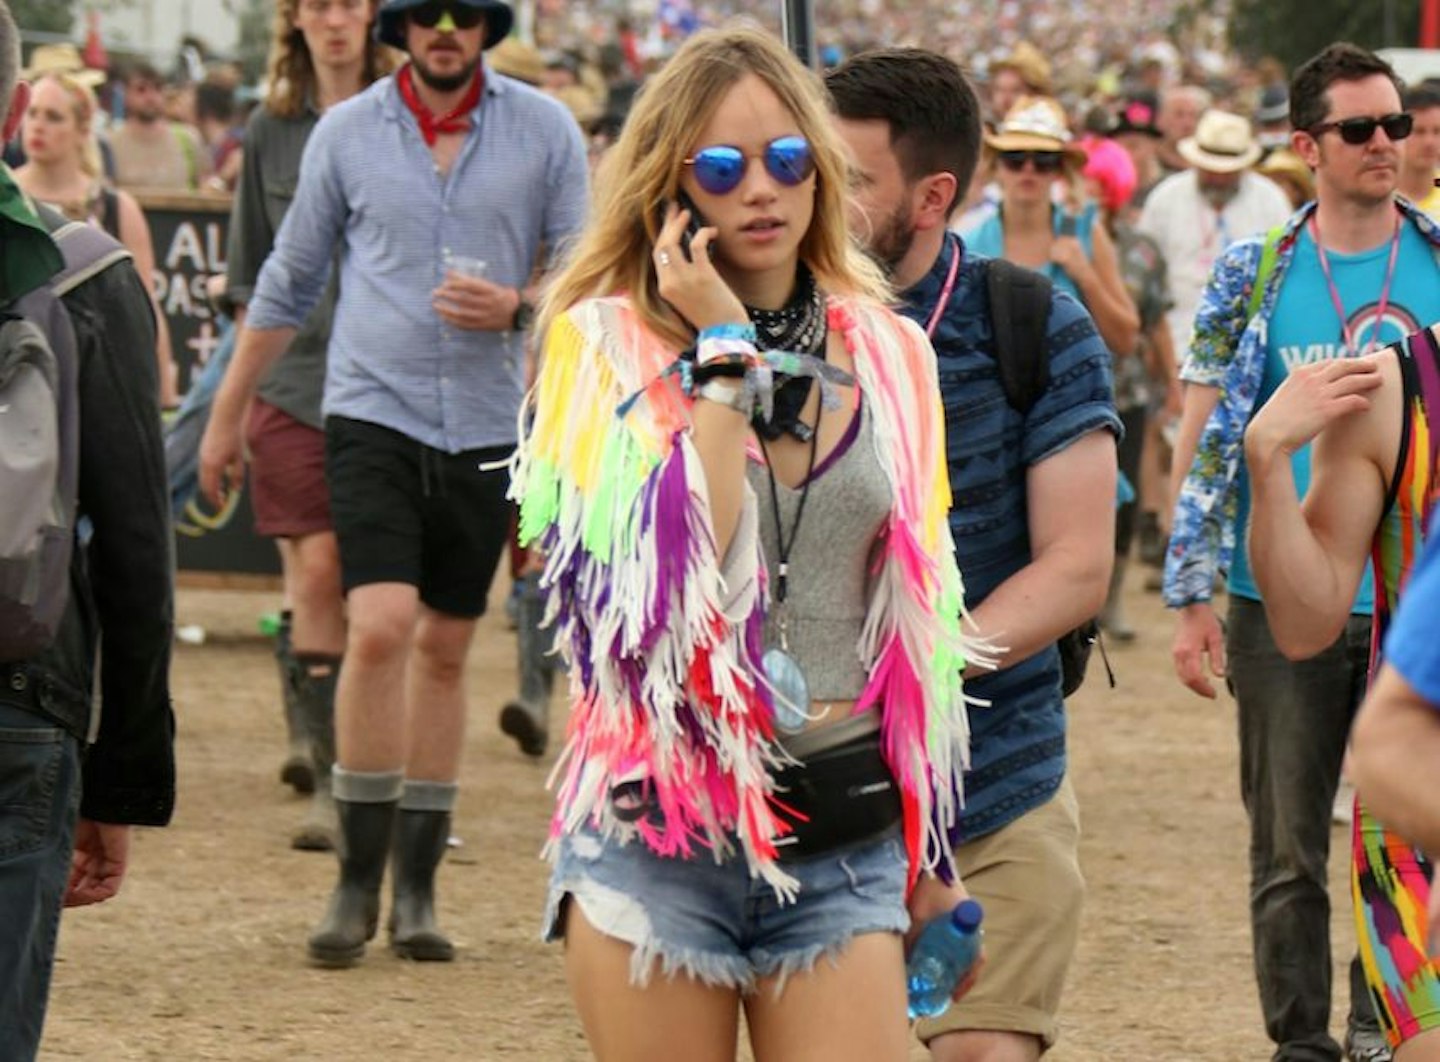 Festival Favourite: The Bum Bag Is Making A Comeback